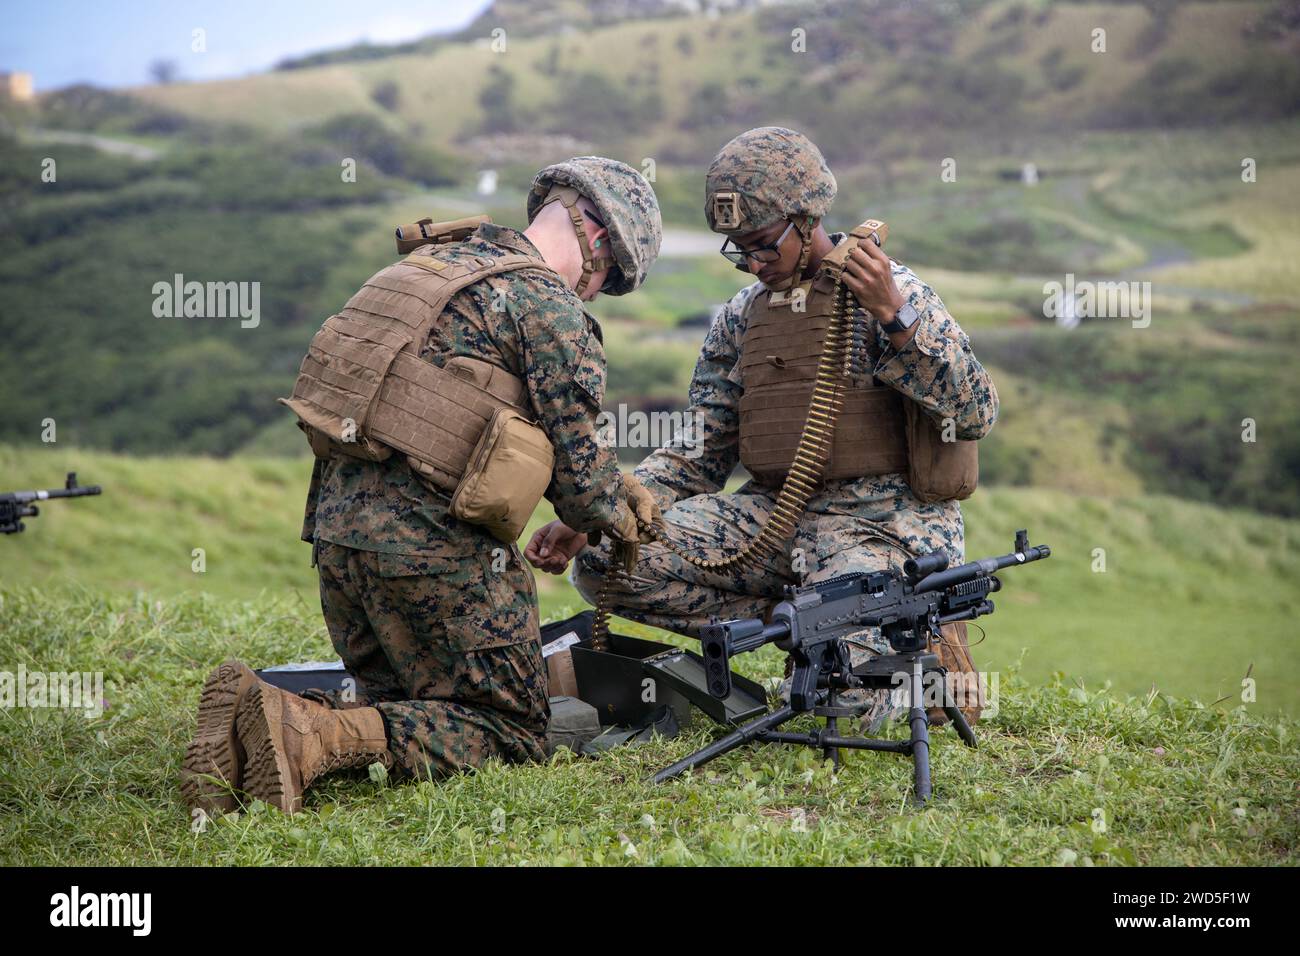 U.S. Marines with Marine Wing Support Squadron (MWSS) 174, Marine Aircraft Group 24, 1st Marine Aircraft Wing, prepare to fire M240-B and M2 .50-caliber machine guns at the Marine Corps Air Station Kaneohe Bay range, Hawaii, Jan. 16, 2024. The training provided an opportunity for Marines with MWSS-174 to get hands-on training and familiarization with the employment of crew-served weapons. (U.S. Marine Corps photo by Lance Cpl. Logan Beeney) Stock Photo